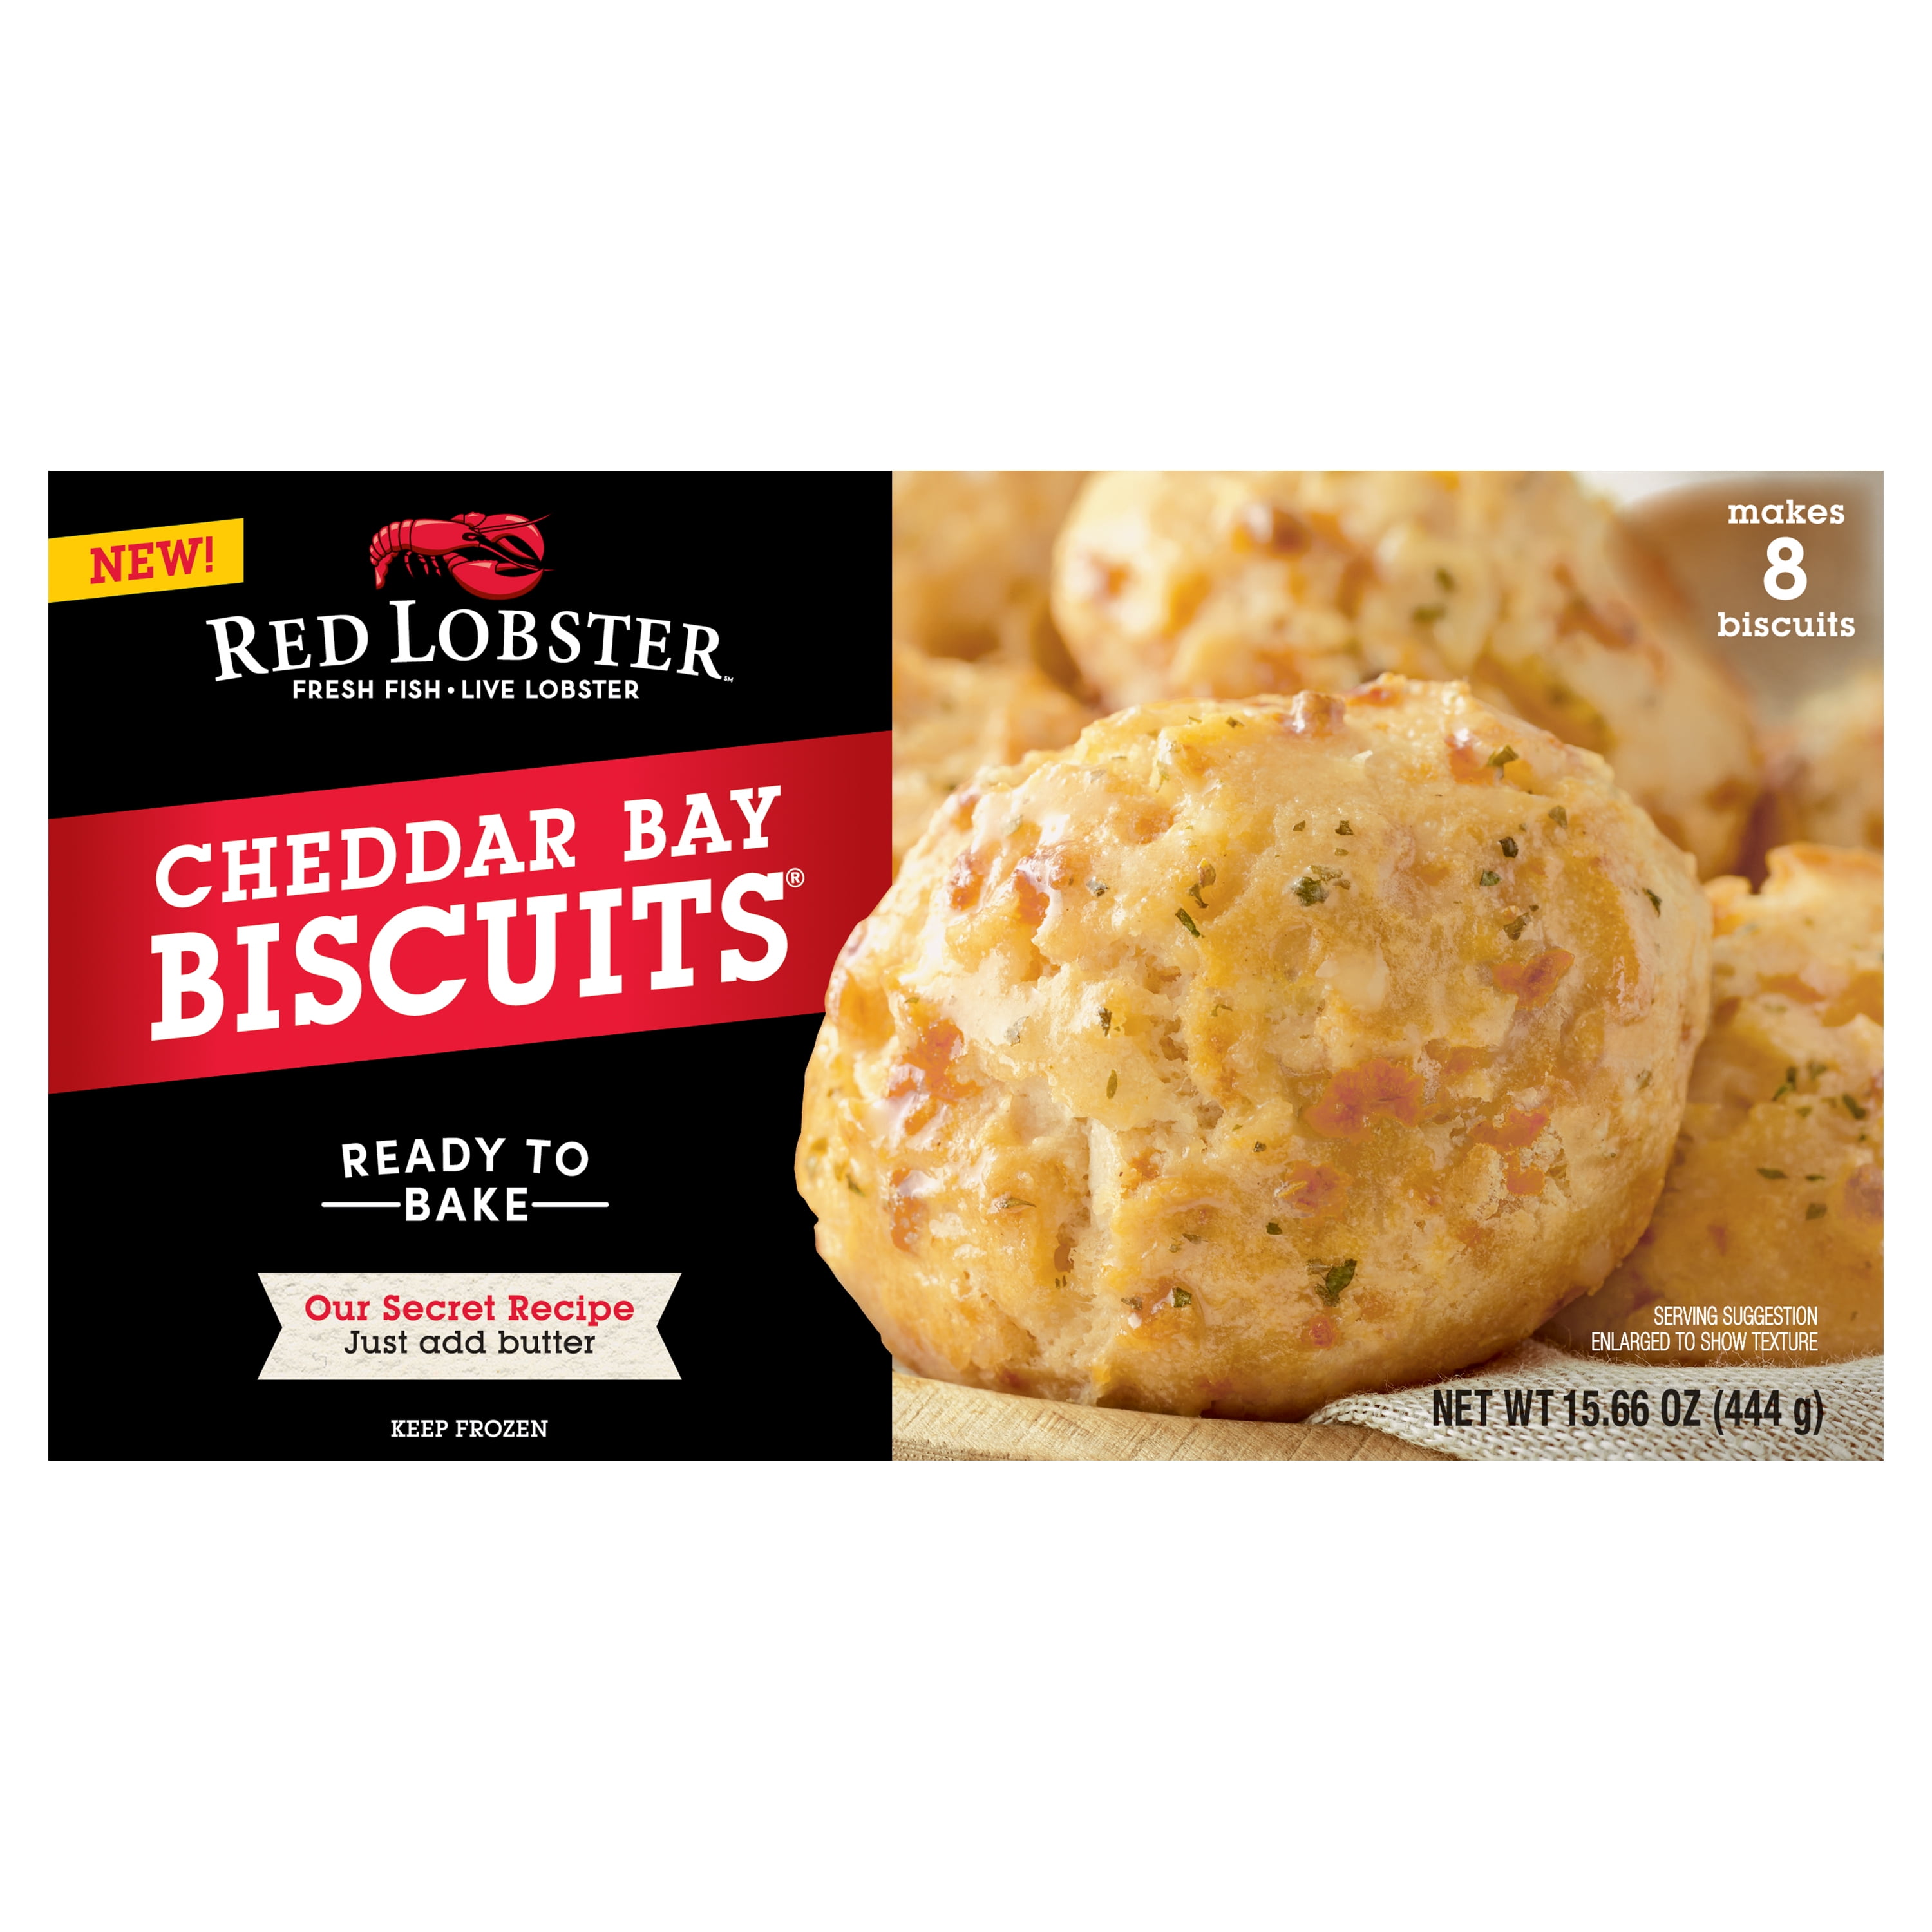 Red-Lobster-Cheddar-Bay-Frozen-Biscuits-Ready-to-Bake-Makes-8-Biscuits-15-66-oz-Box_0a85518f-8d27-4706-96f3-36f83467852c.4d2eec208d0ff2f632ac6081ffeee303.jpeg